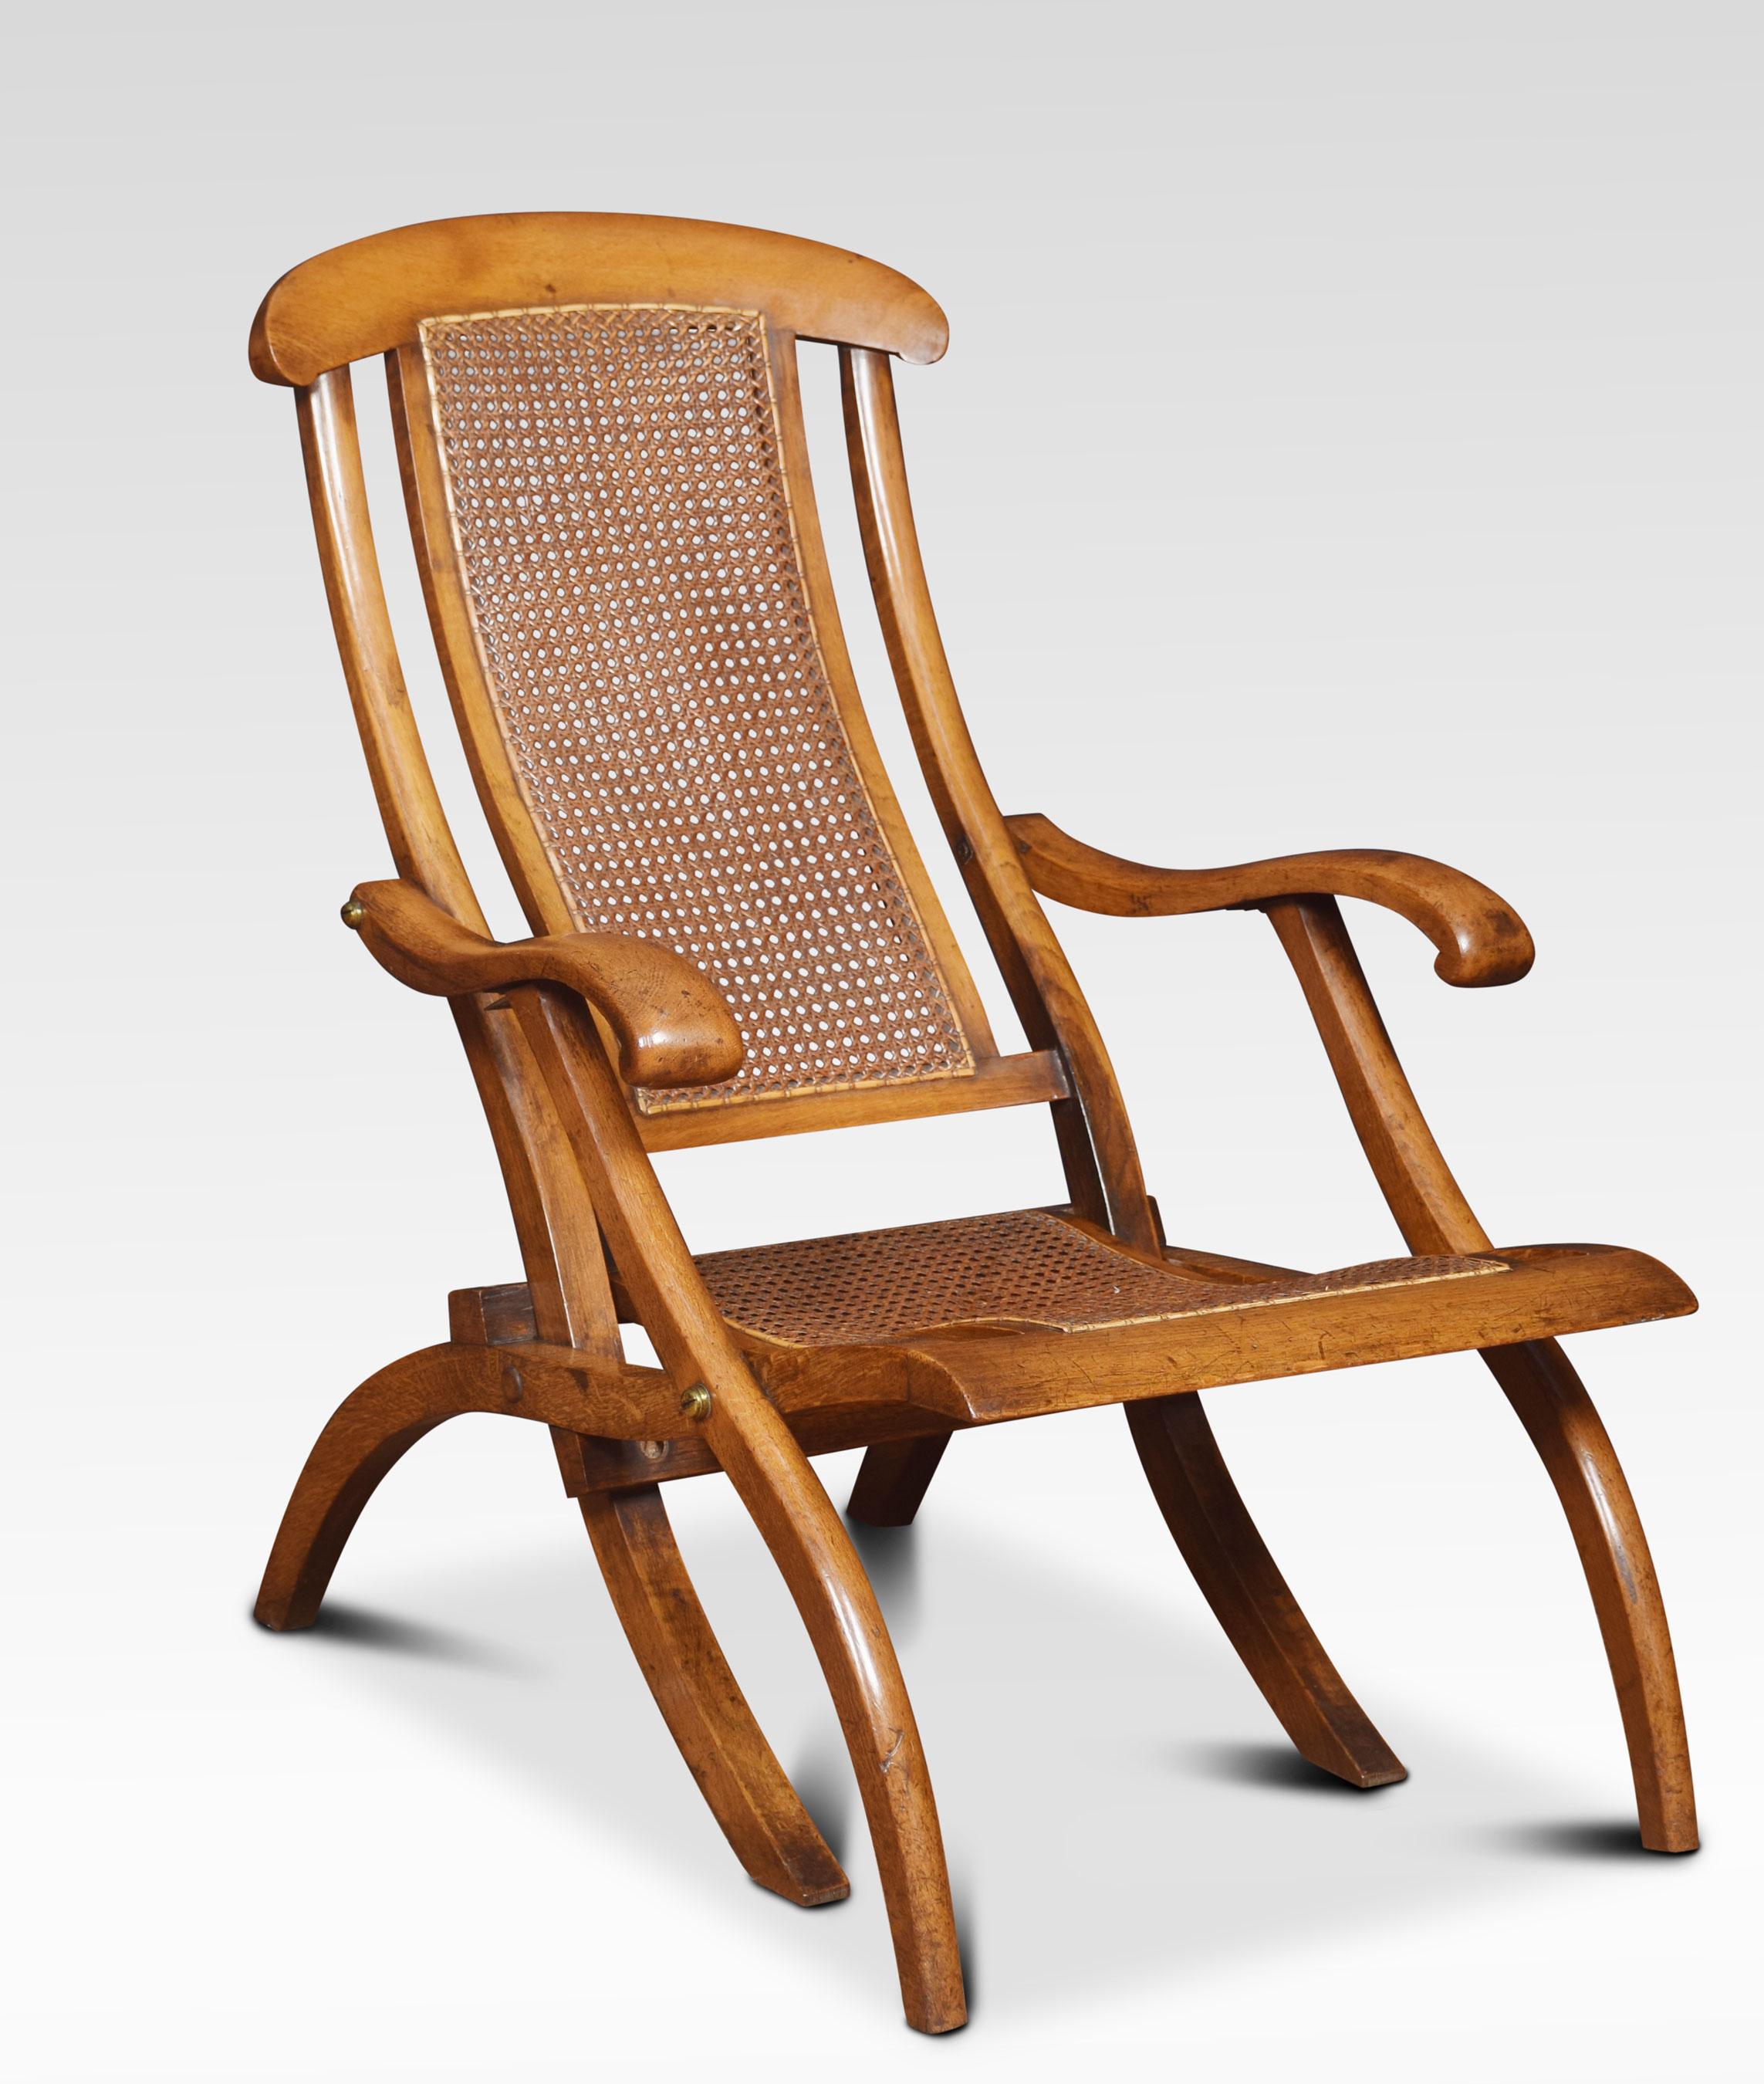 Pair of walnut framed folding steamer deck chairs. The cane work backs and seats, flanked by scrolling arms and splayed legs. They fold very easily for storage.
Dimensions:
Height 34.5 inches, height to seat 13.5 inches
Width 23.5 inches
Depth